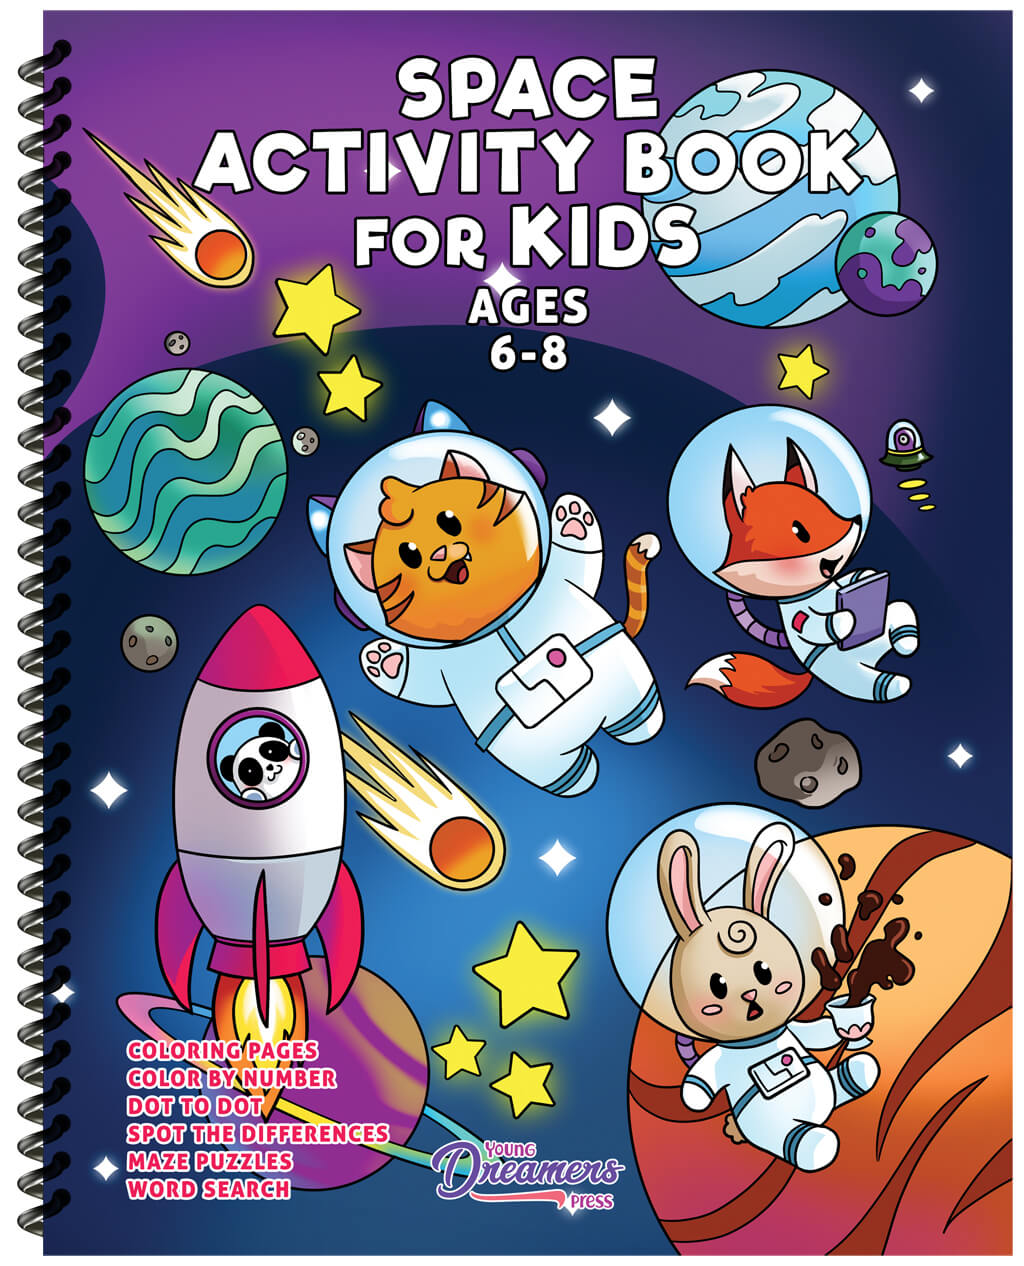 Space Activity Book for Kids Ages 6-8 (Spiral Edition)